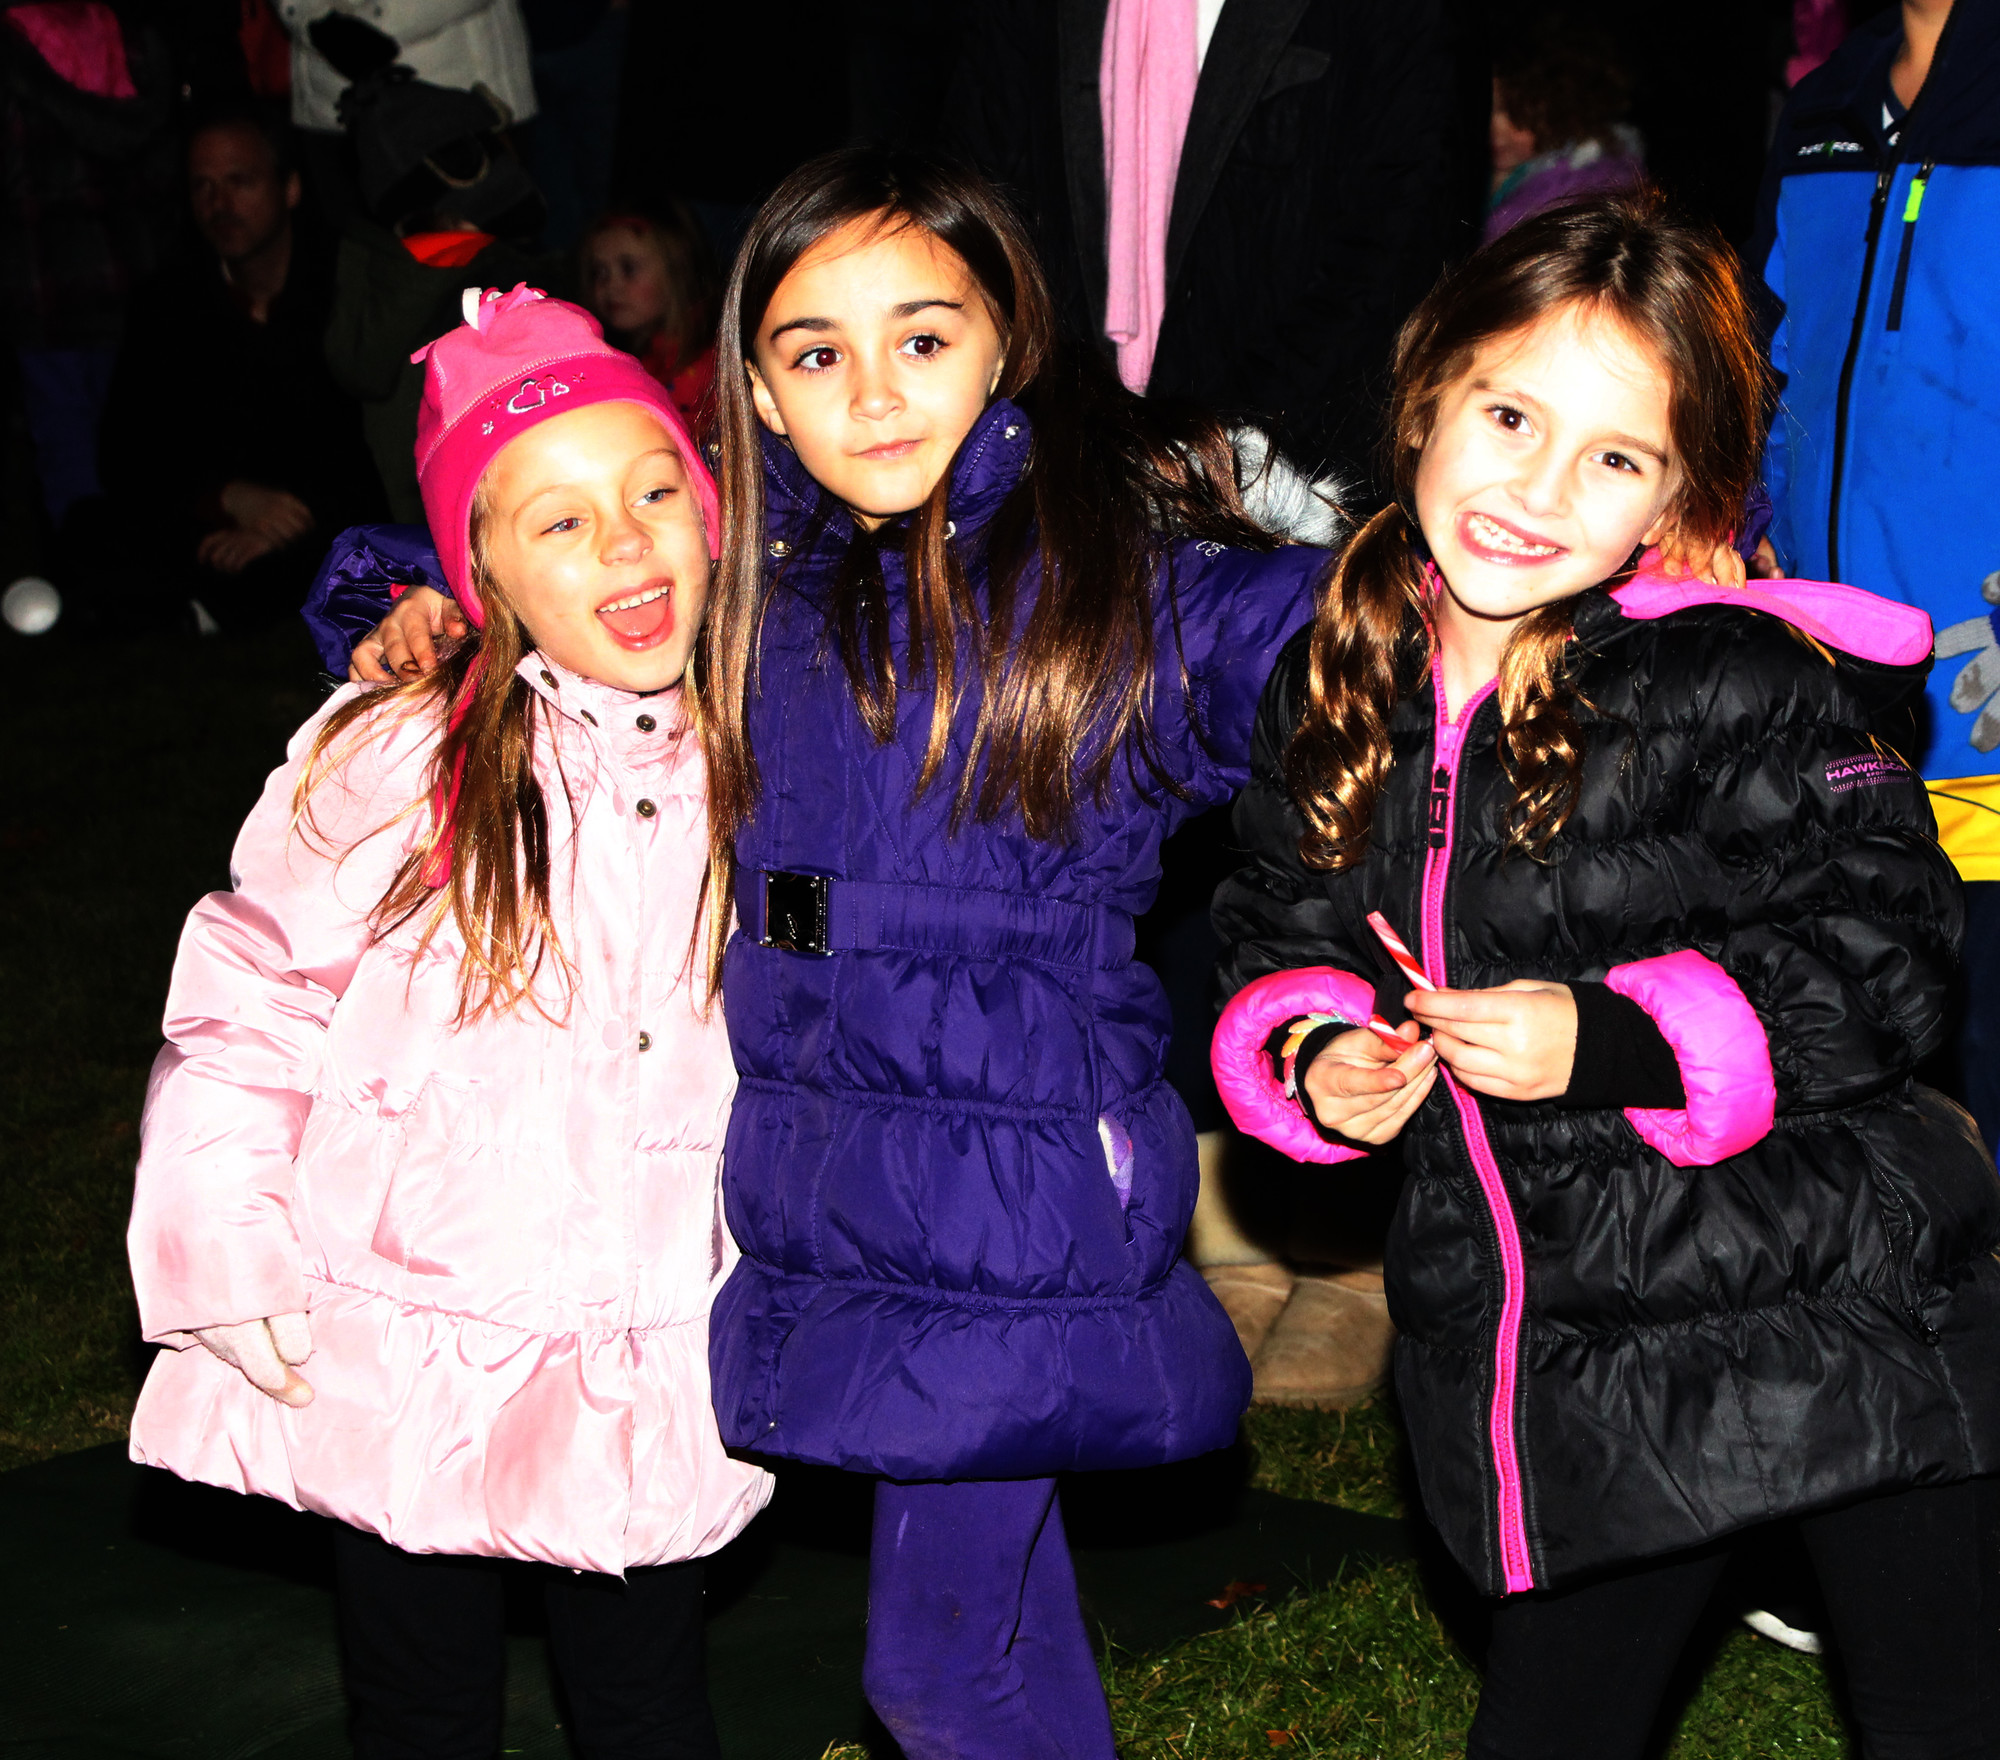 Nicole Vaco, 6, Chelsa Devine, 7, and Keera Deluca, 7, were dancing and singing to holiday tunes.